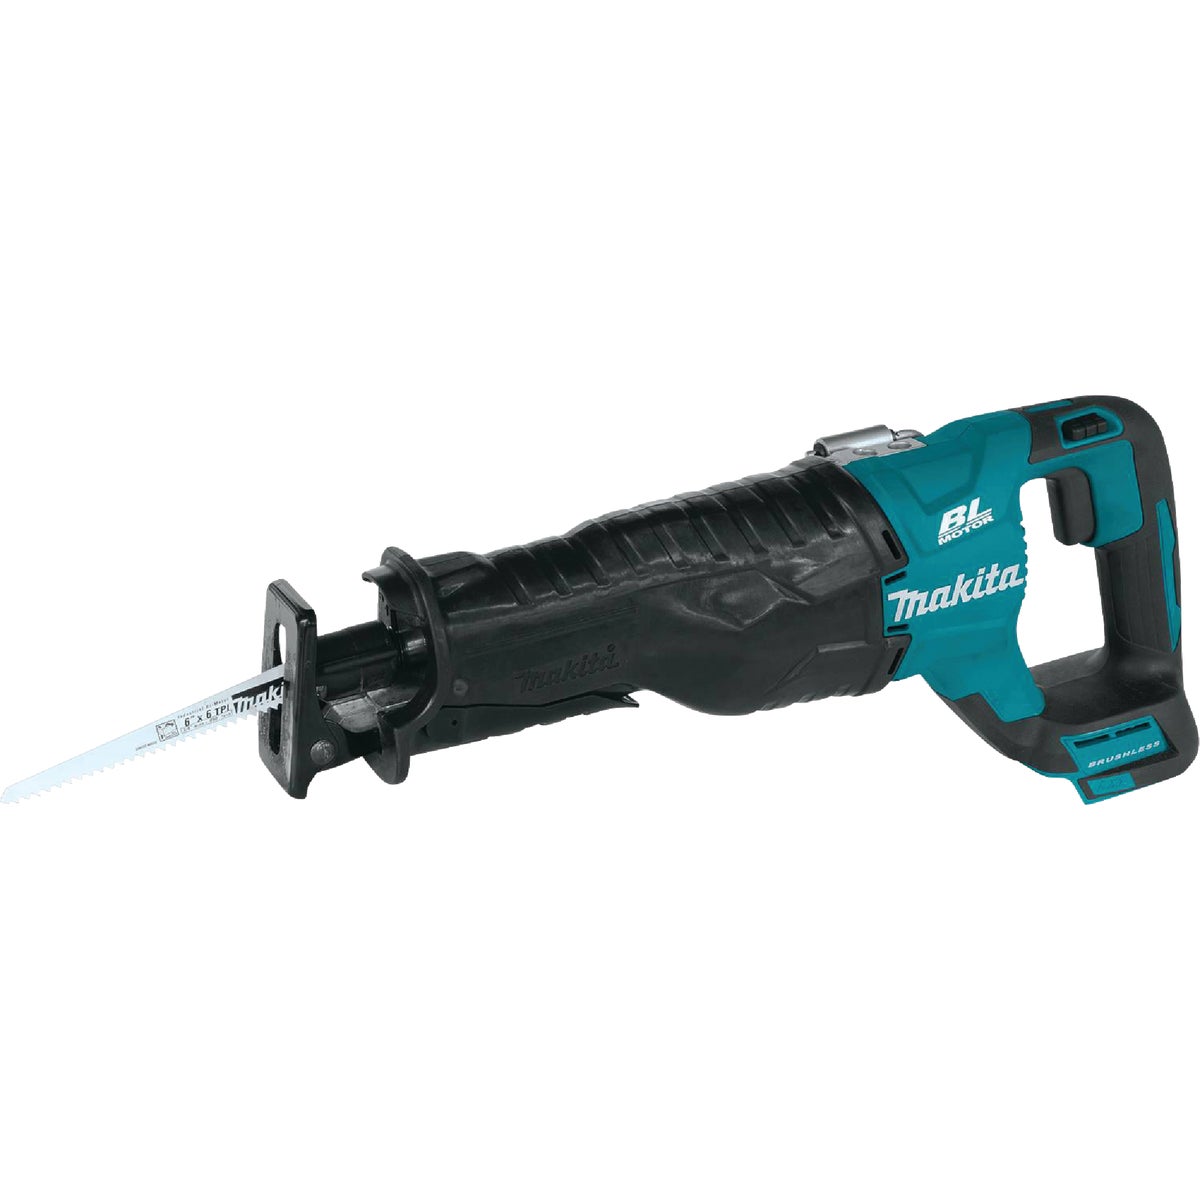 Makita 18 Volt LXT Lithium-Ion Brushless Cordless Reciprocating Saw (Bare Tool)